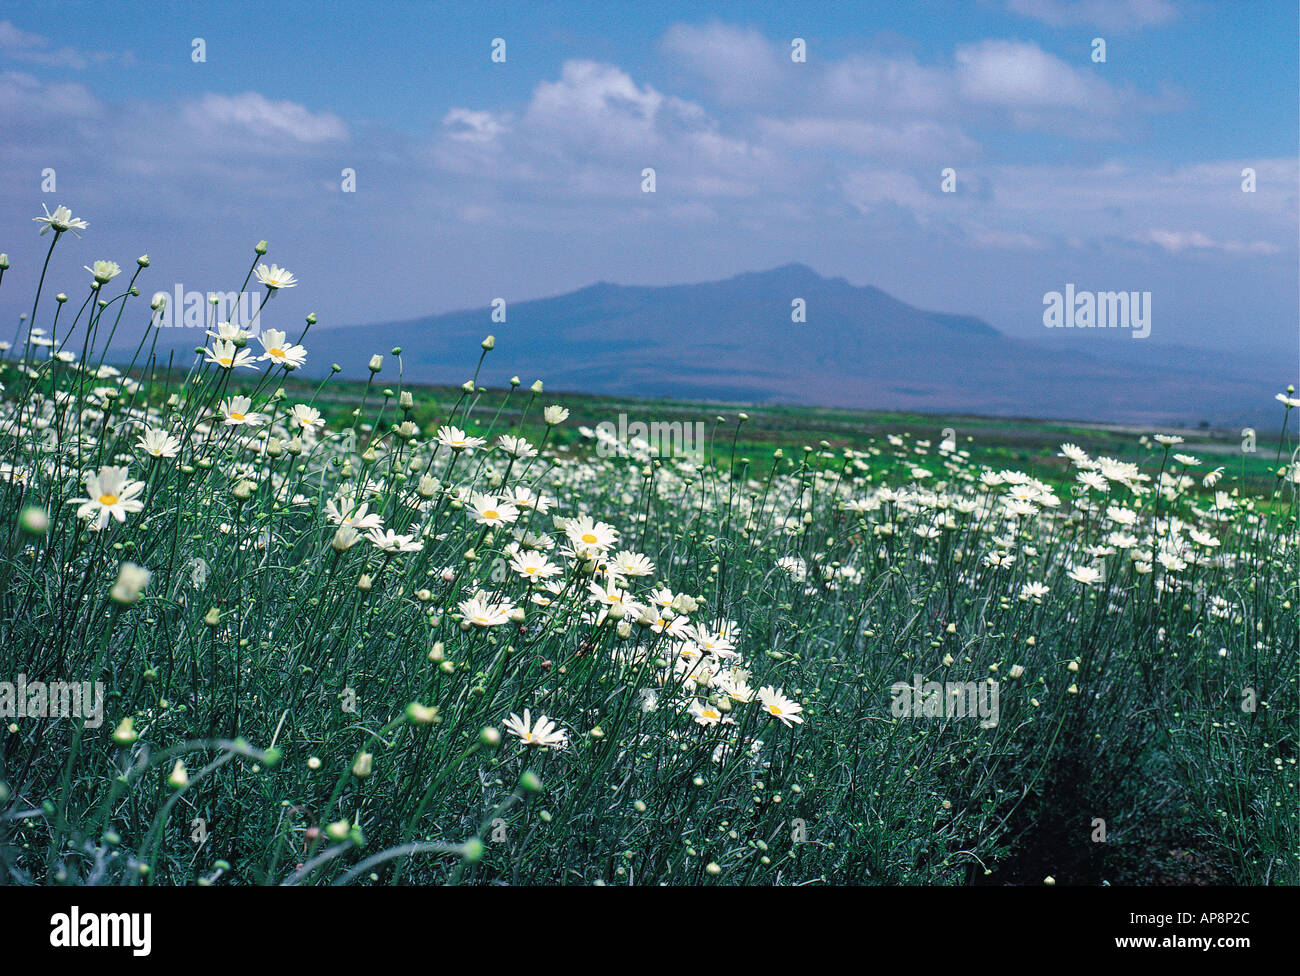 Pyrethrum daisies grown for insecticide production near Mount Longonot Kenya Stock Photo